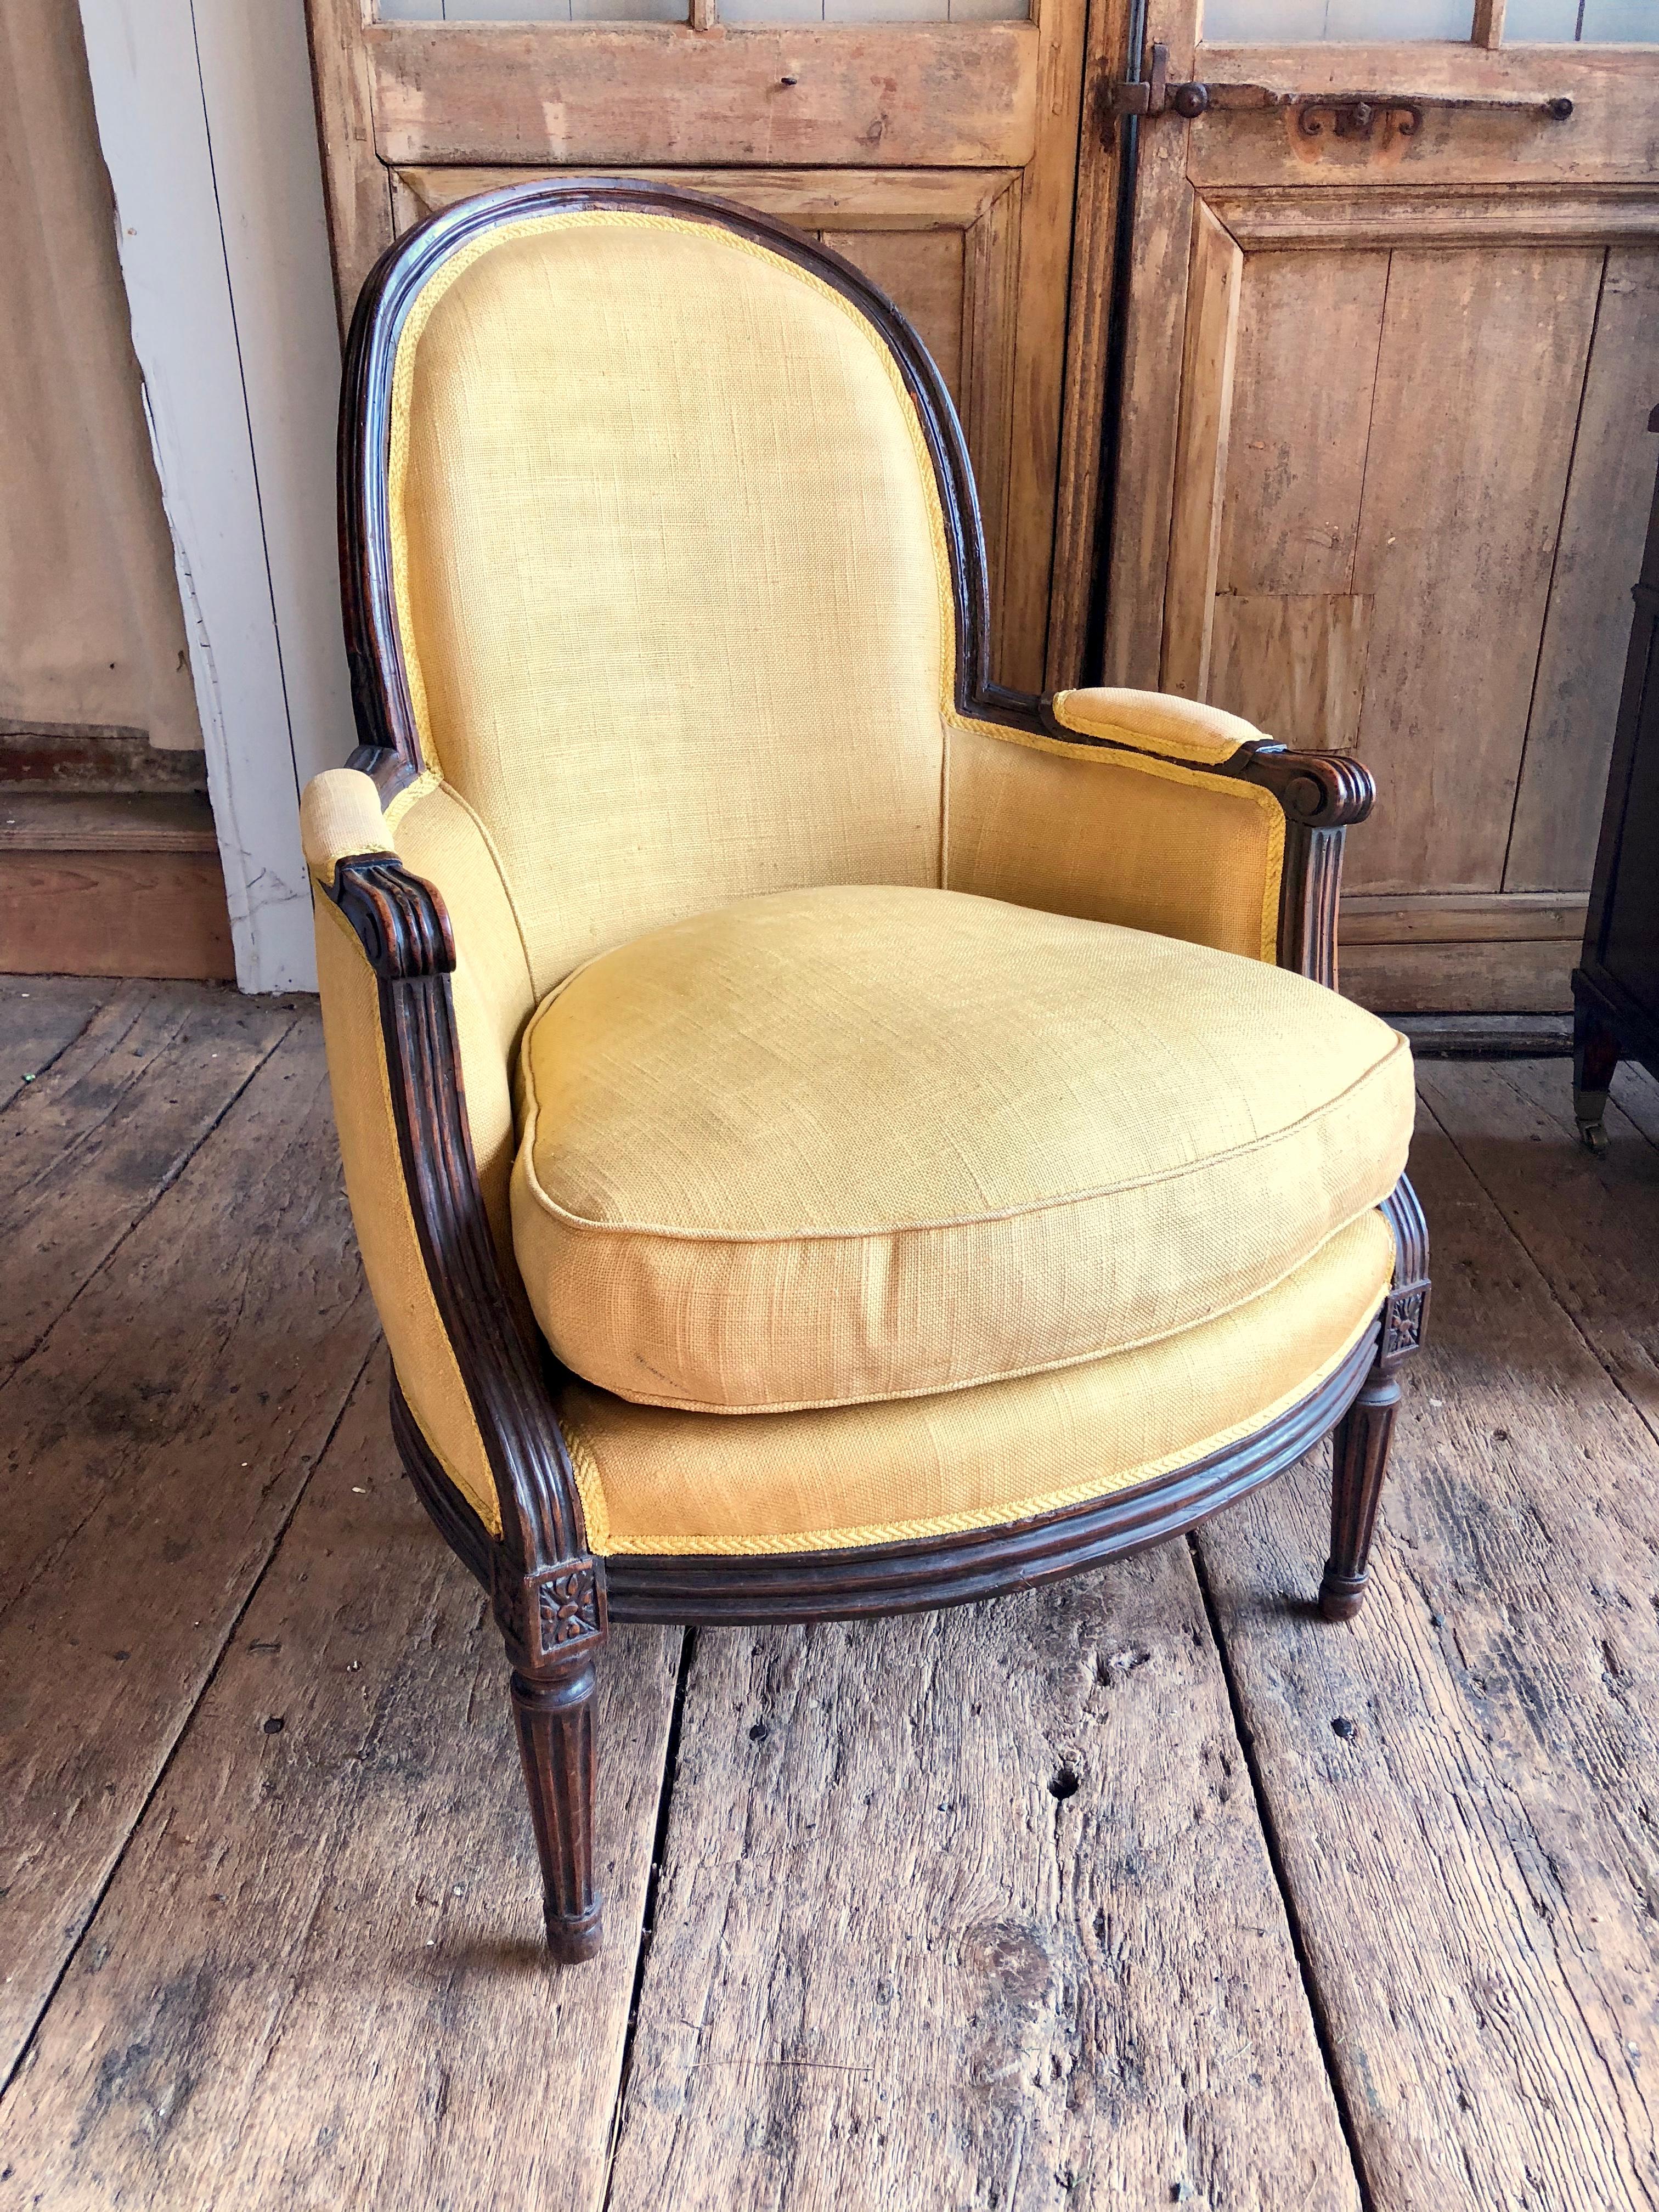 A late 18th century French Louis XVI Period bergère “gondole” in beech with old walnut finish and a great patina, upholstered in a yellow linen fabric with feather-stuffed seat cushion. Nice proportions and very comfortable.